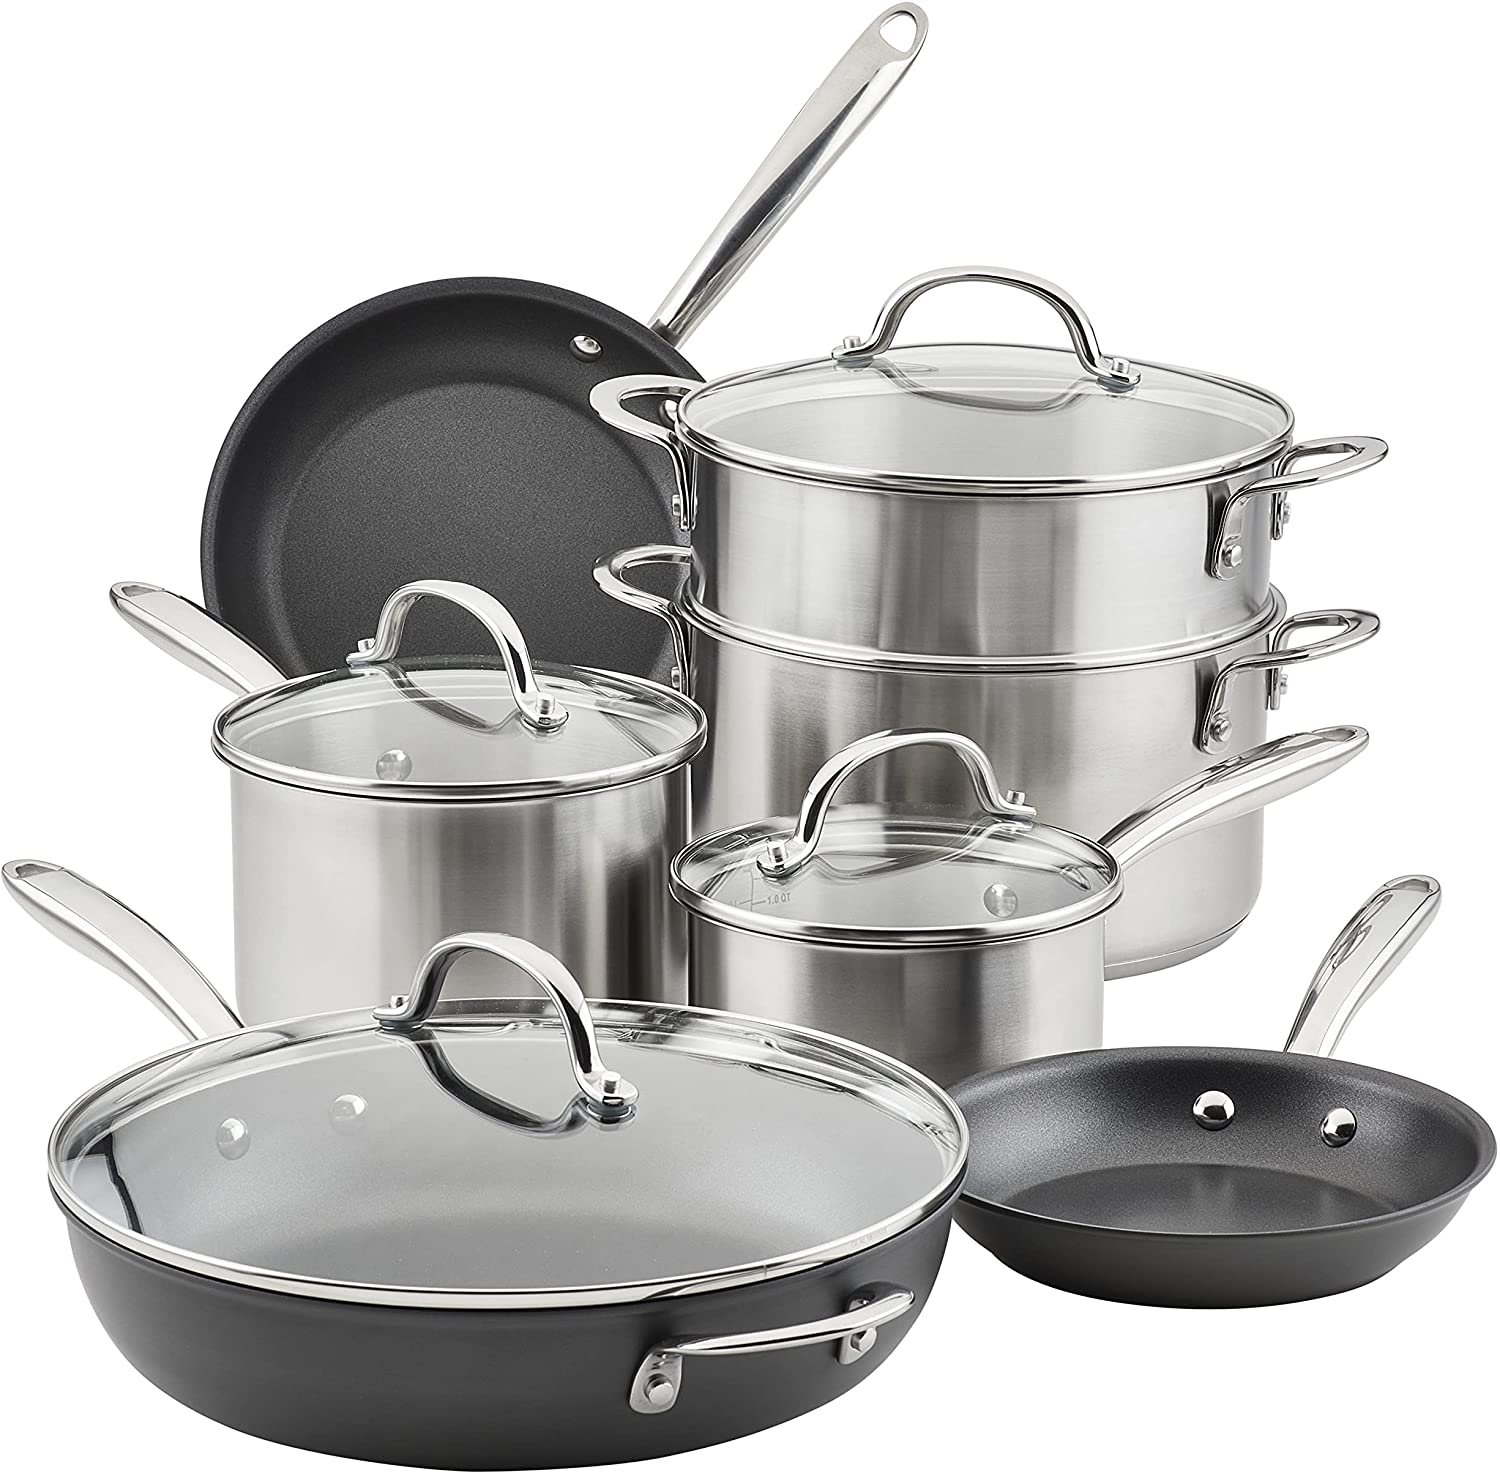 Rachael Ray Professional Stainless Steel/Hard Anodized Nonstick 11-Pc. Cookware Set